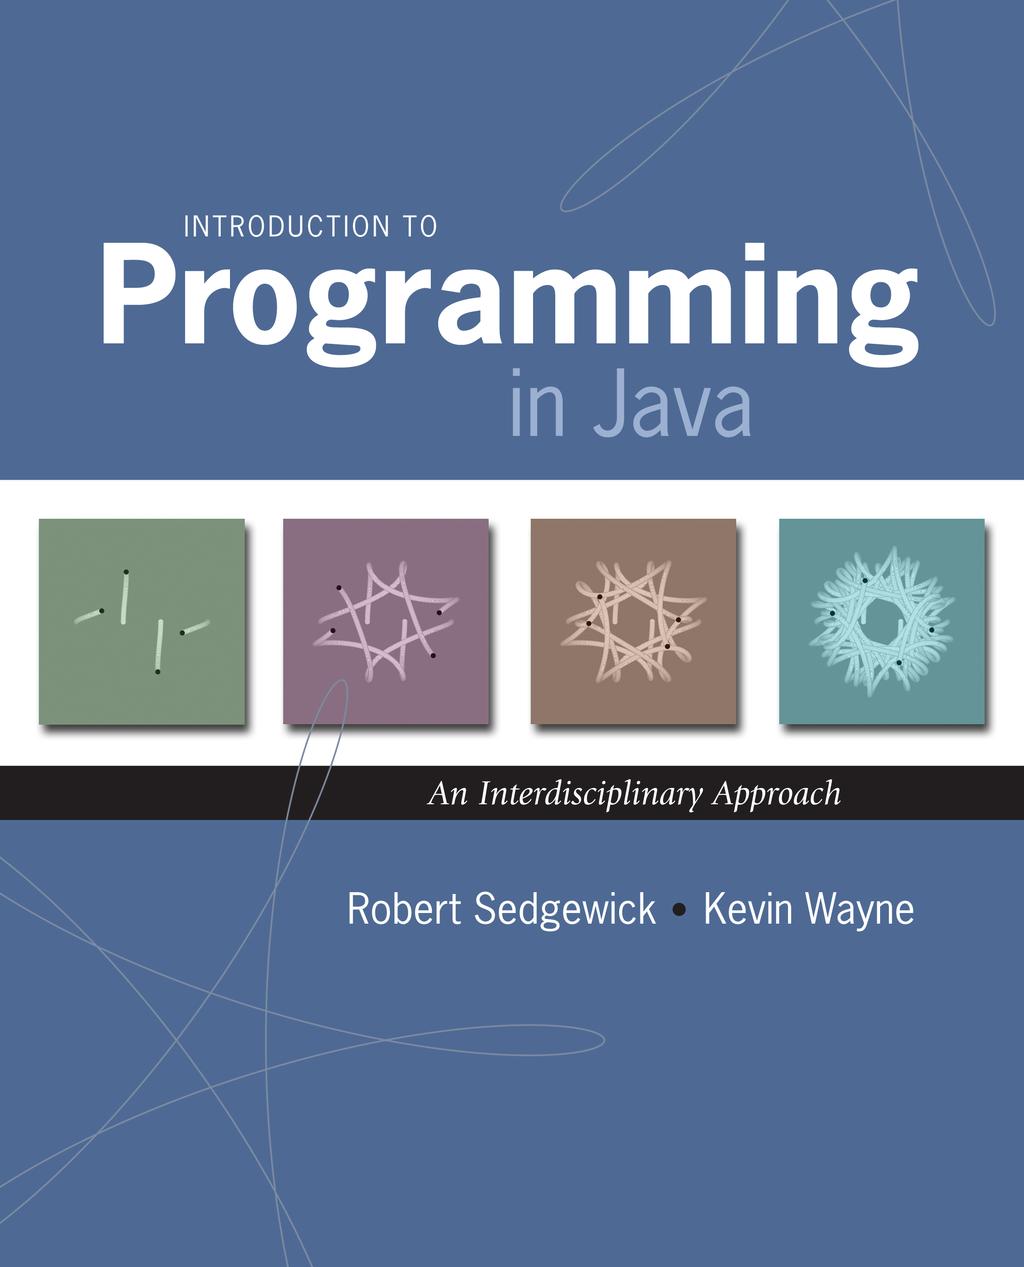 type Introduction to Programming in Java: An Interdisciplinary Approach Robert Sedgewick and Kevin Wayne Copyright 2002 2010 1/29/11 6:40 AM set of values